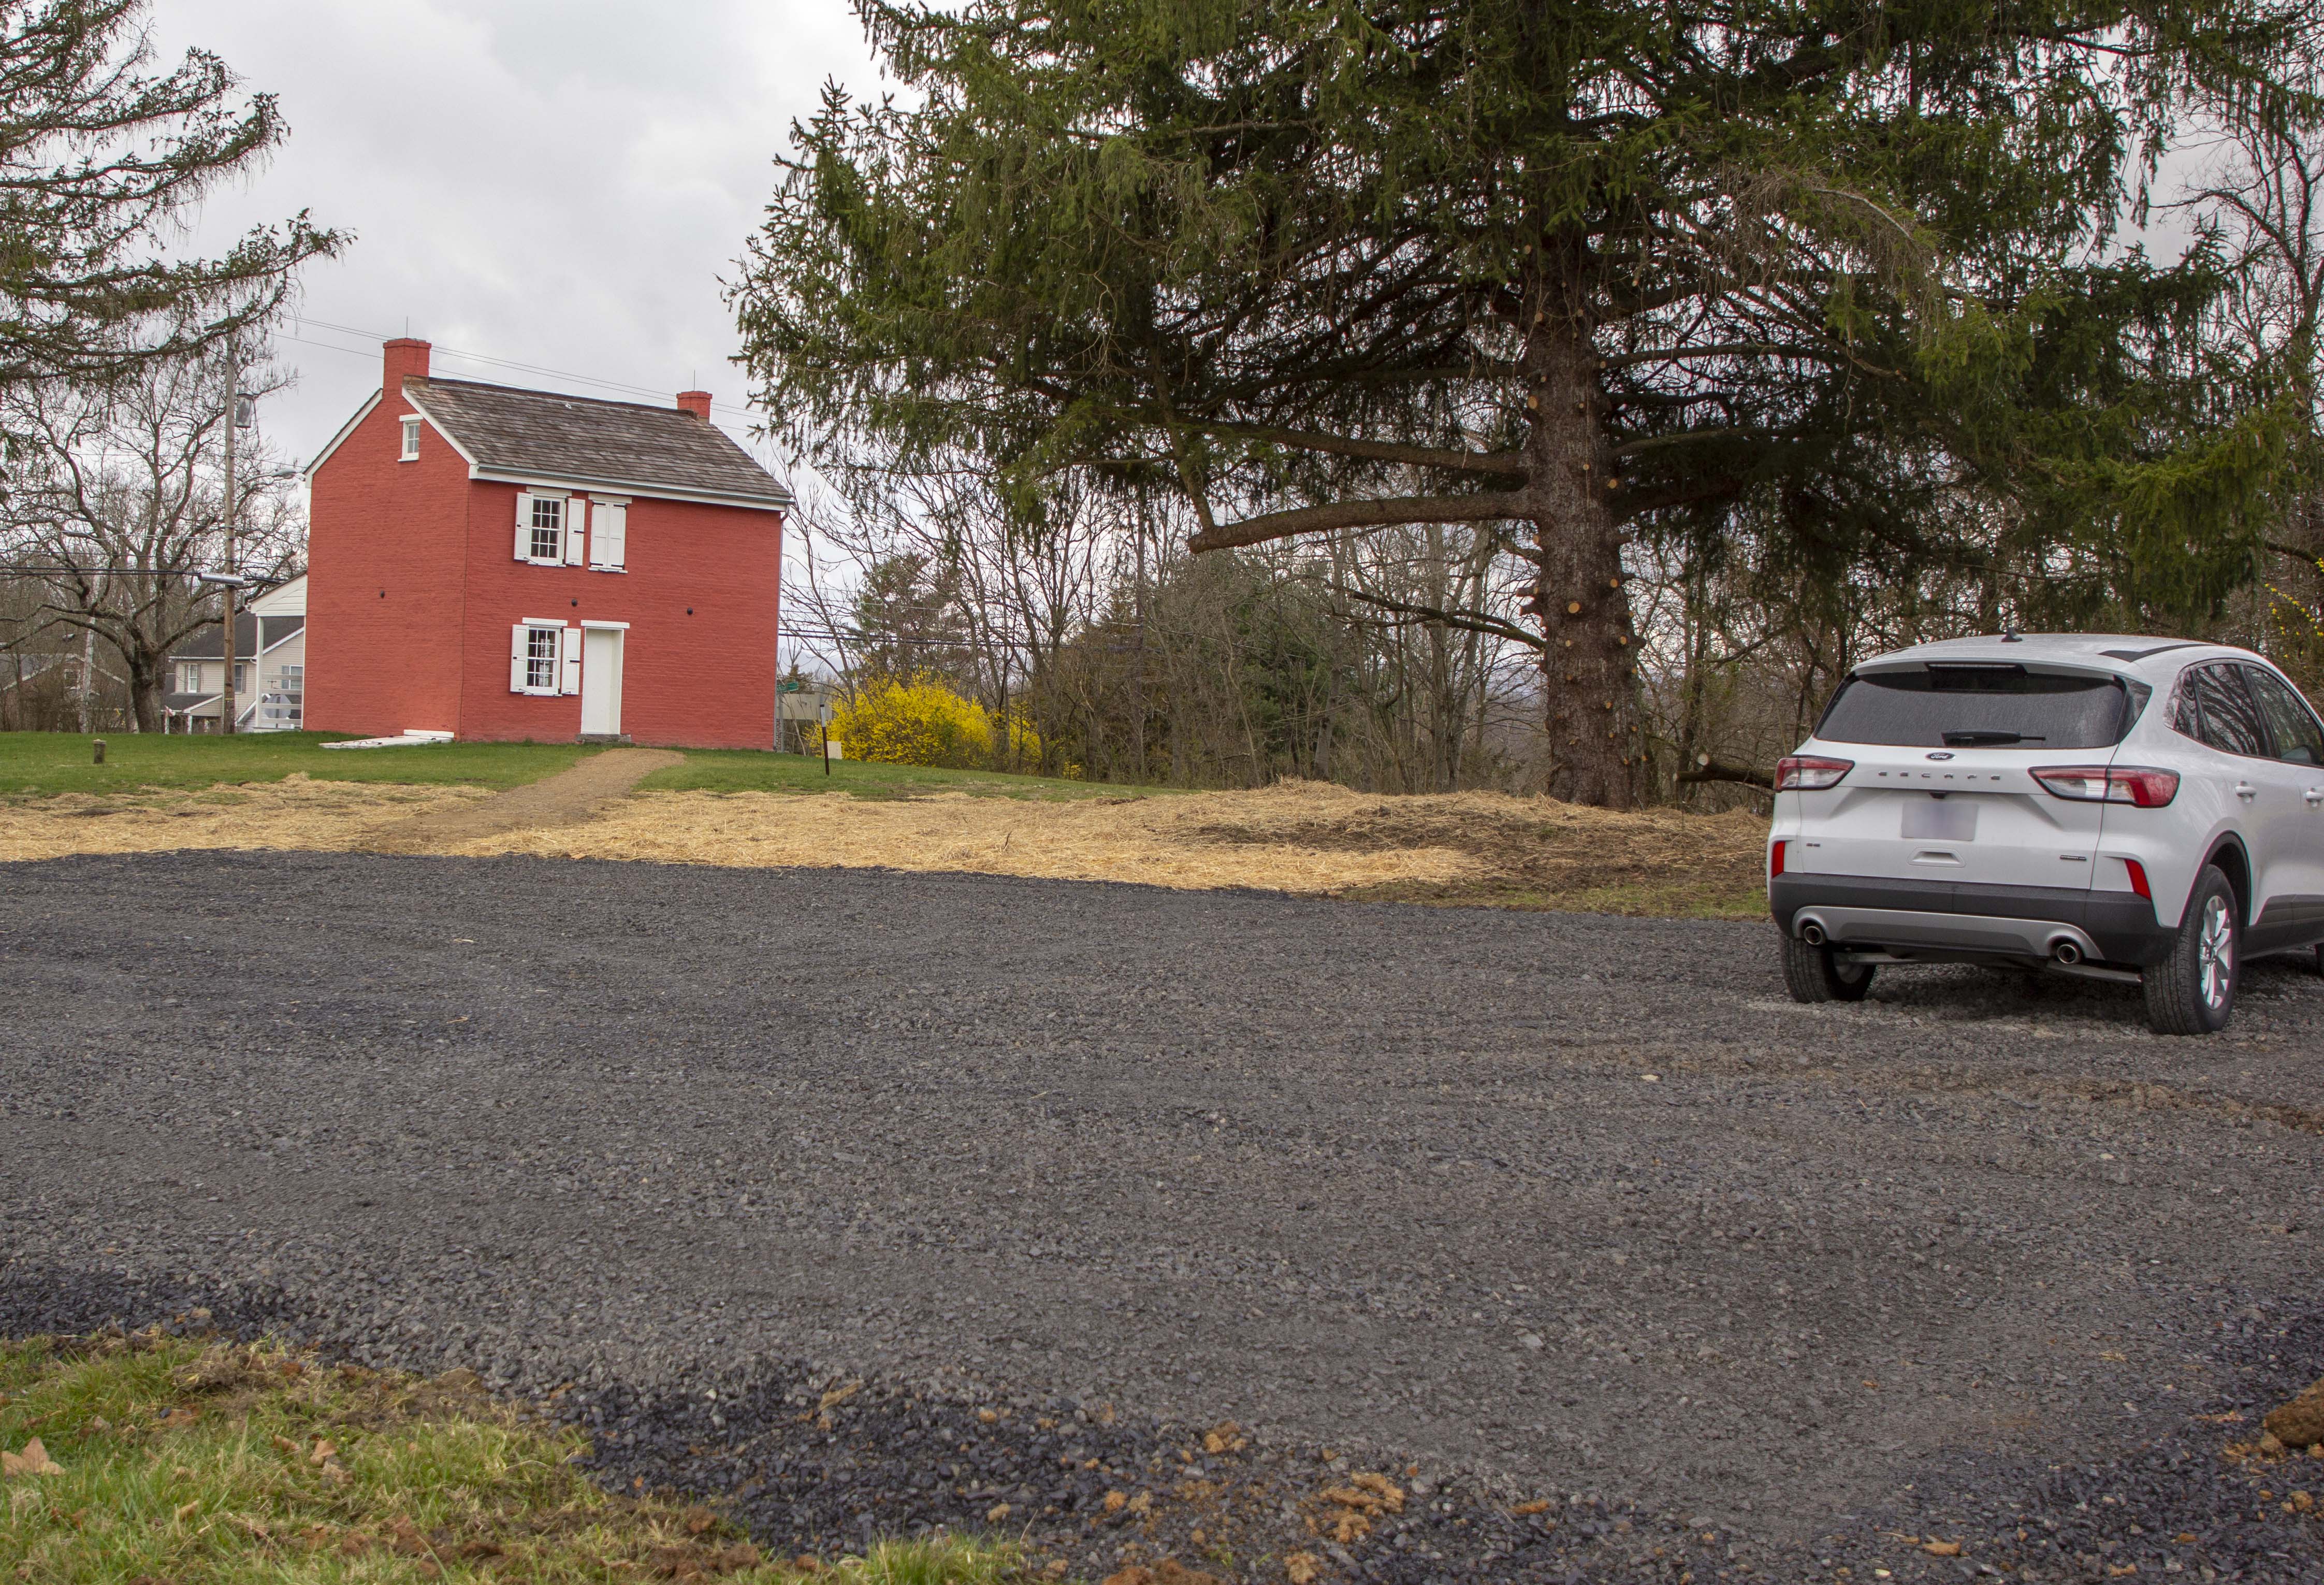 In the foreground is a dark gravel parking lot with a small white SUV on the right. In the distance in the center is a large pine tree and on the left is a small, two story, red brick house with white shutters and door.